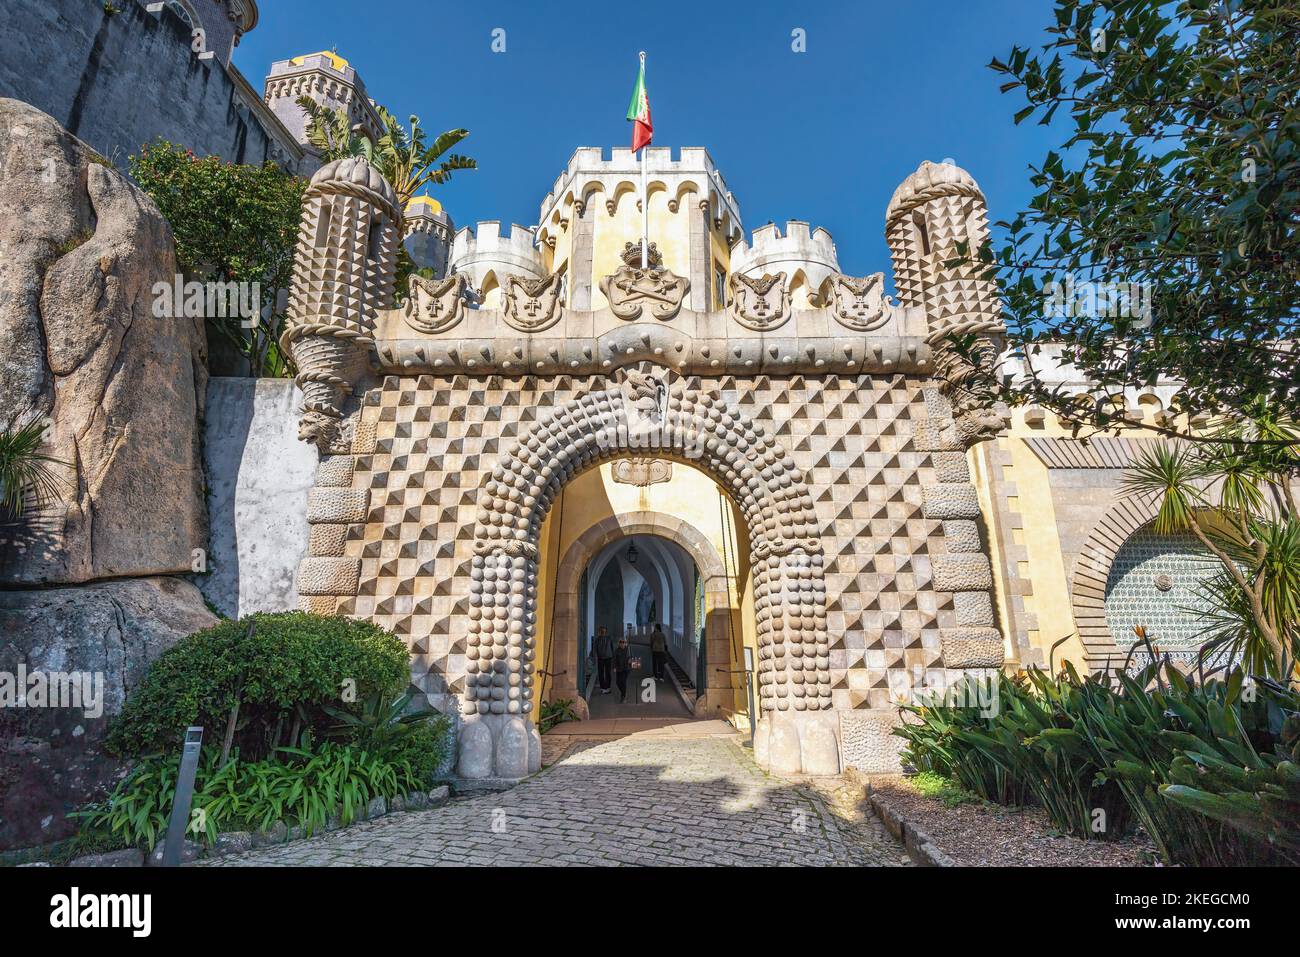 Monumental Gate at Pena Palace - Sintra, Portugal Stock Photo